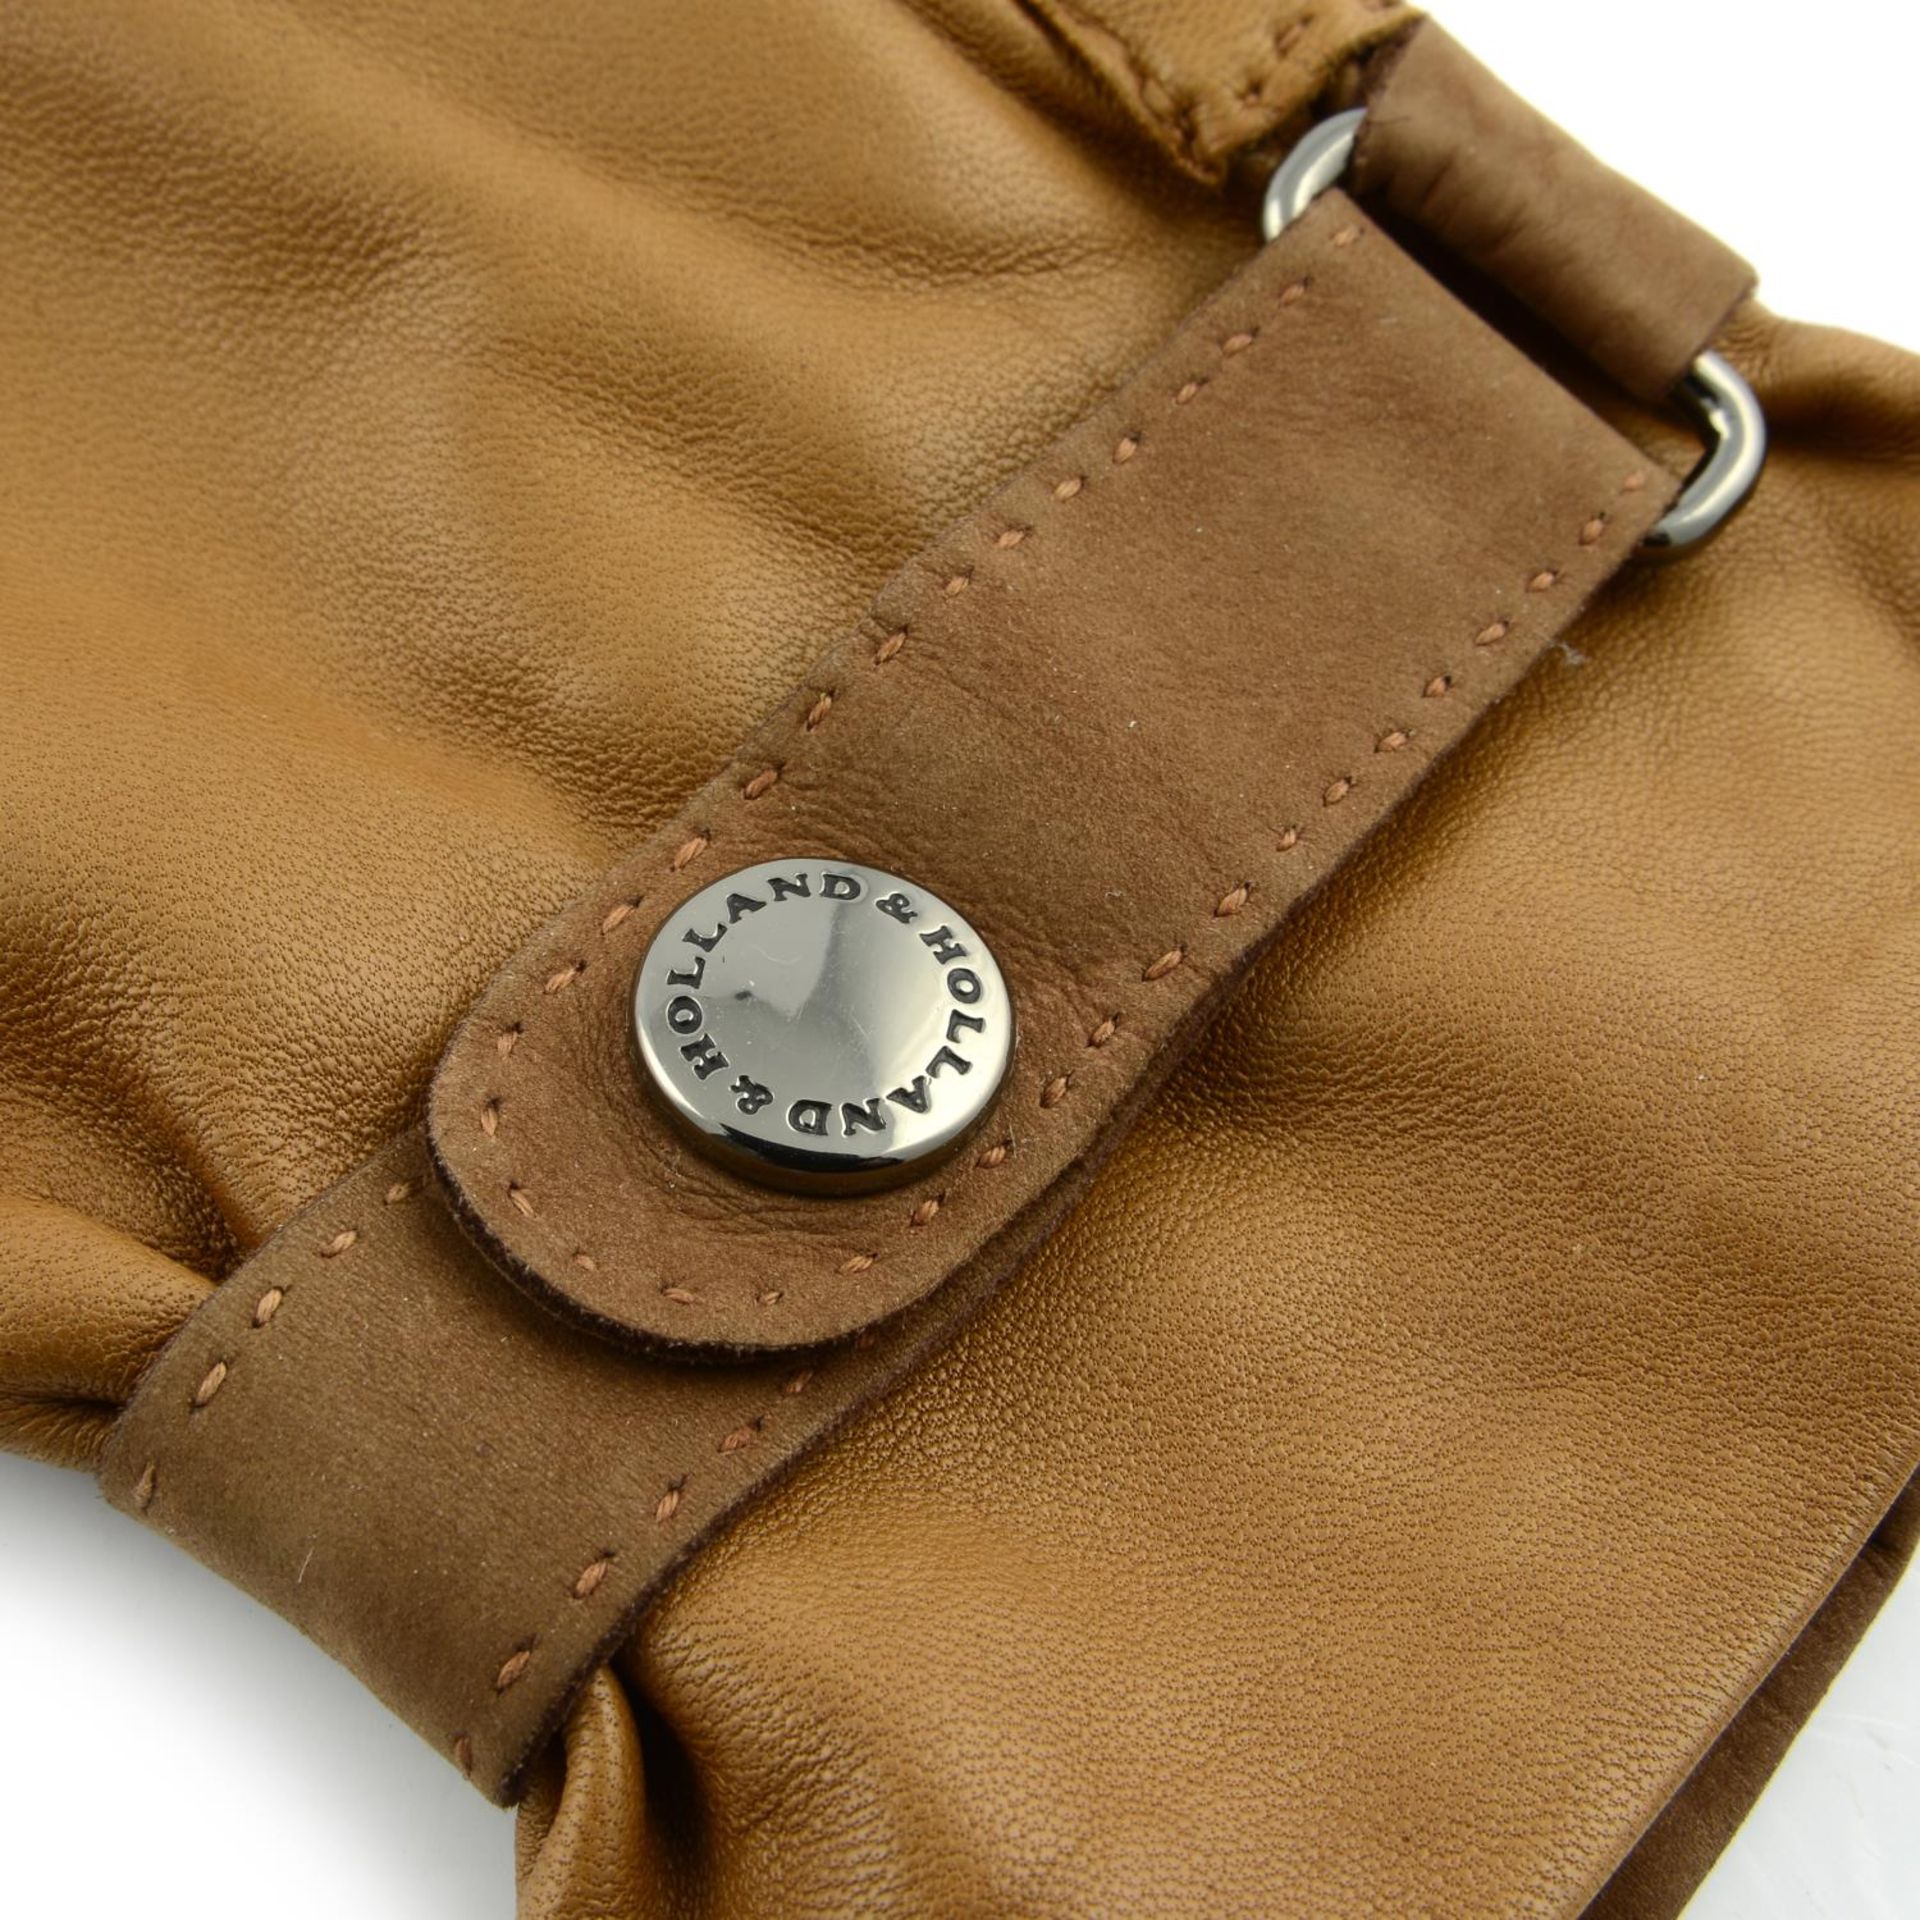 HOLLAND & HOLLAND - a pair of luxury leather hunting gloves. - Image 3 of 5